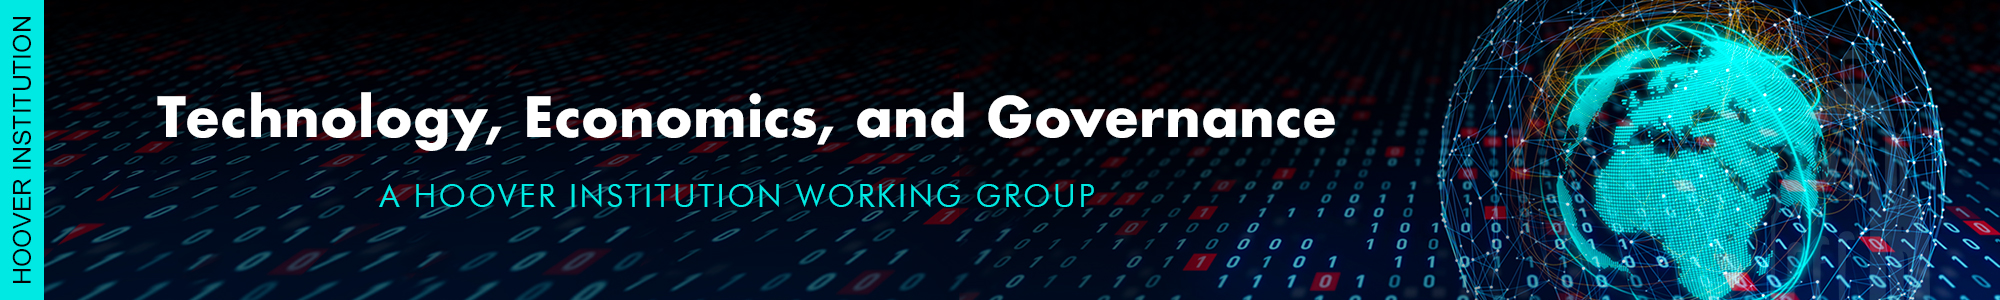 technology-economics-and-governance-working-group_banner1.jpg